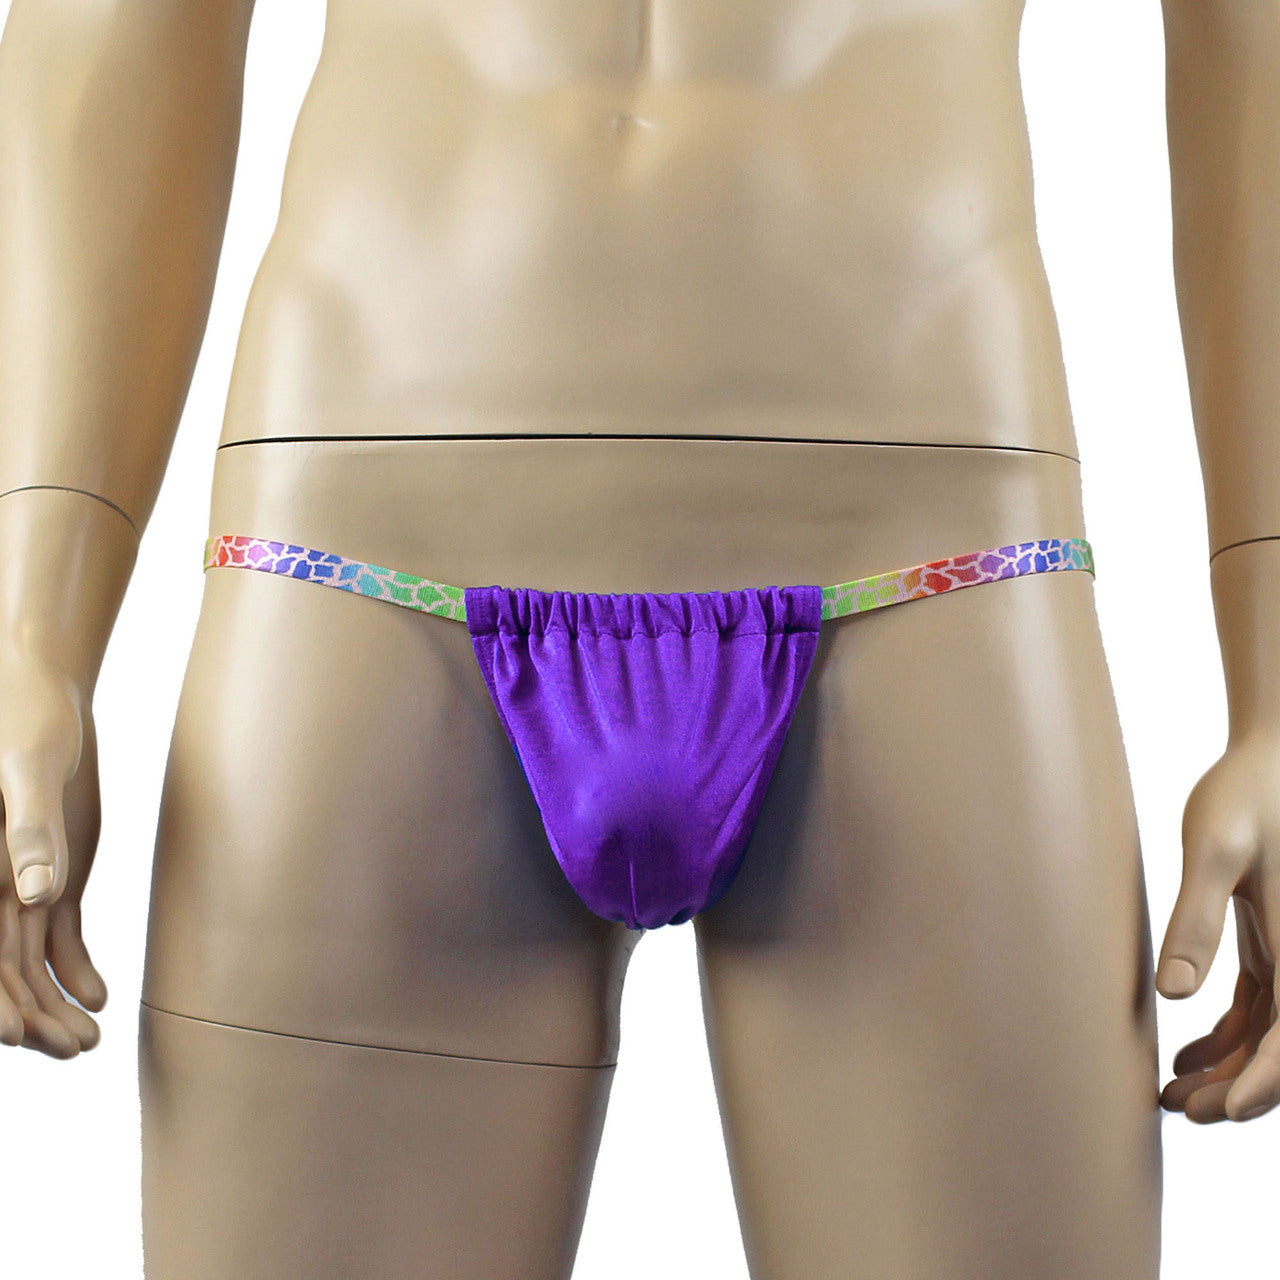 Mens Wild Colourful Adjustable Ball Bag Pouch G string Underwear (purple plus other colours)